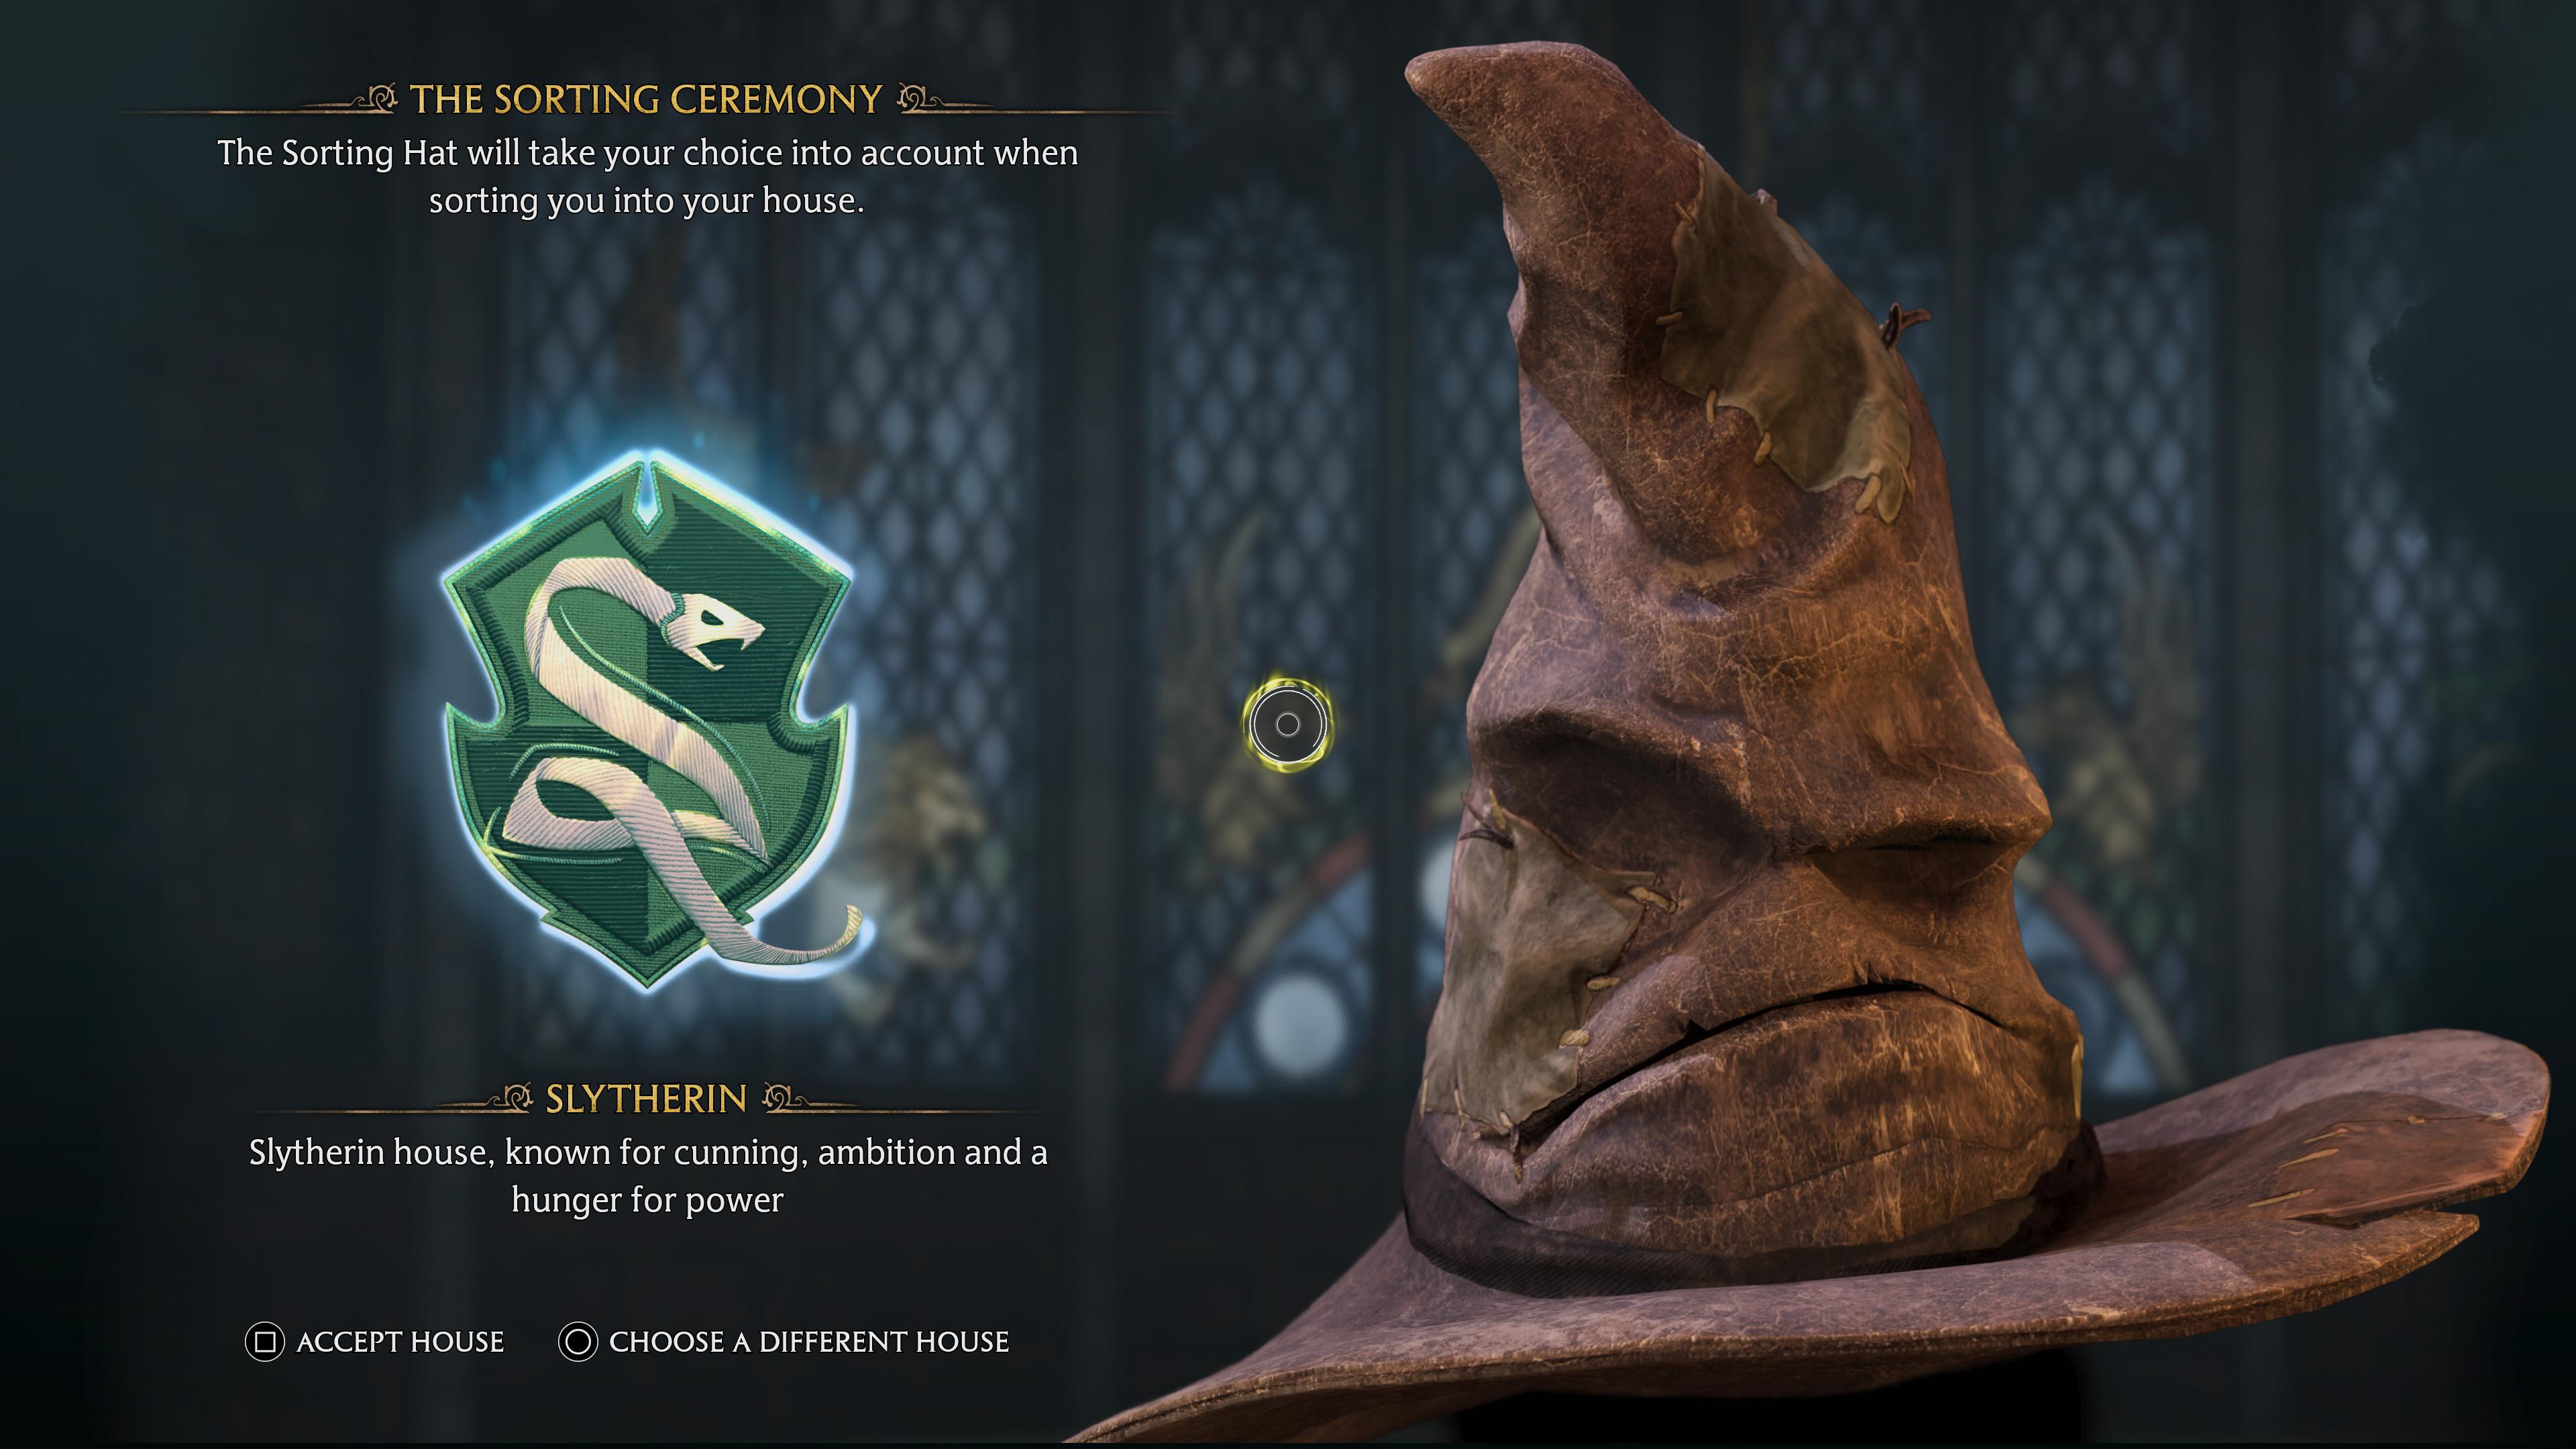 hogwarts legacy sorting hat, can choose another house